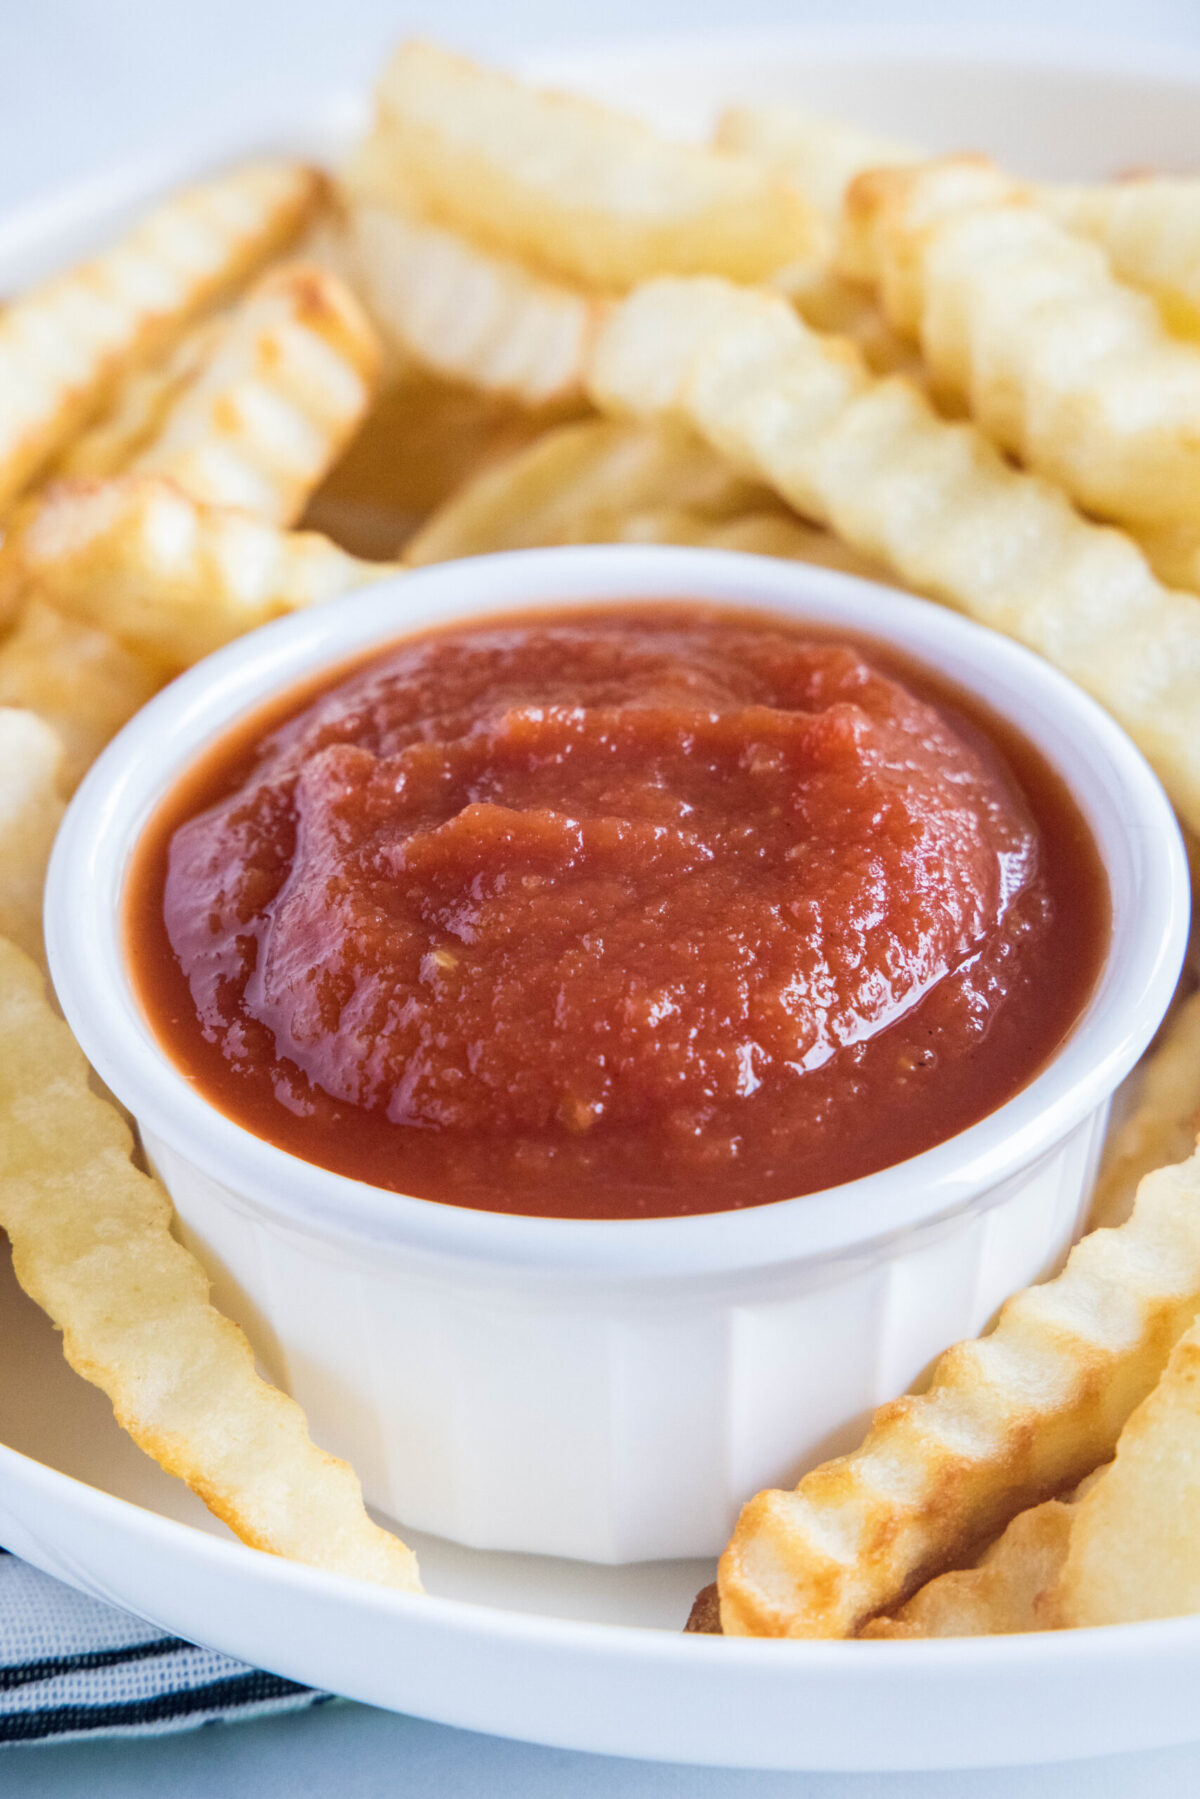 A ramekin of ketchup on a plate of fries